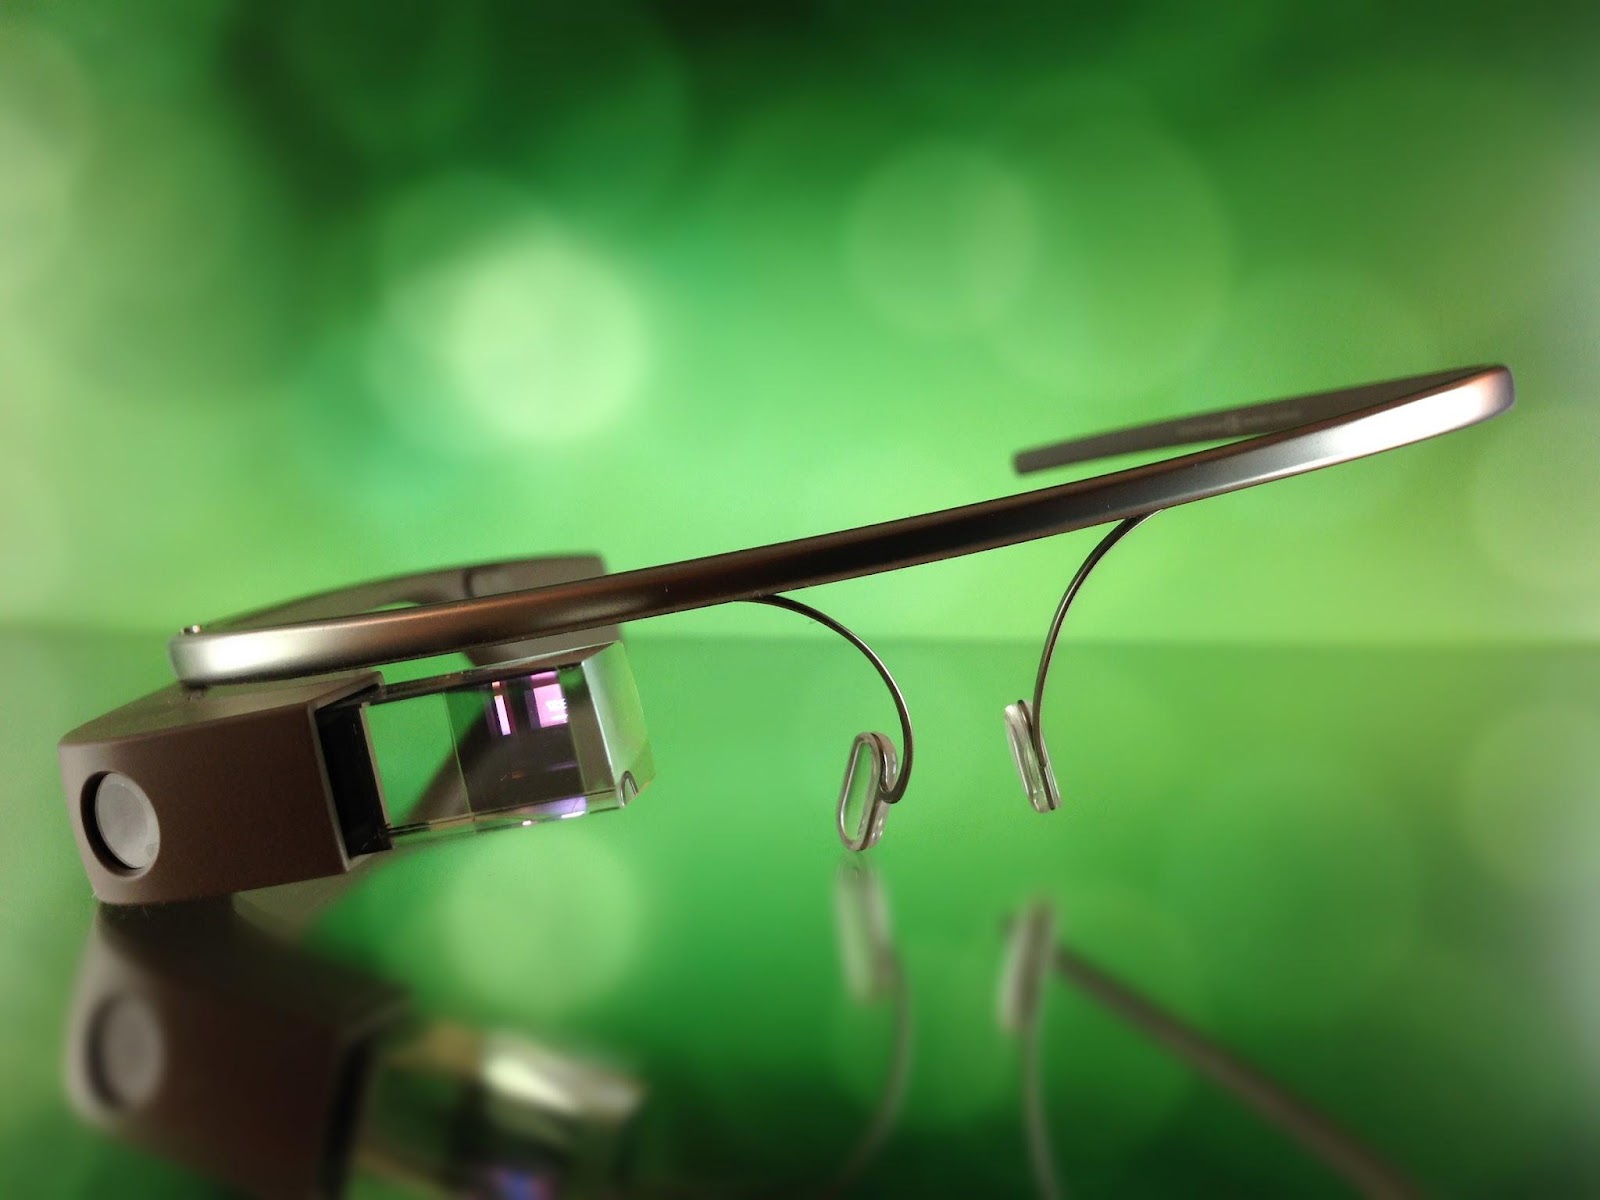 How The Google Glass Augmented Reality Display Works